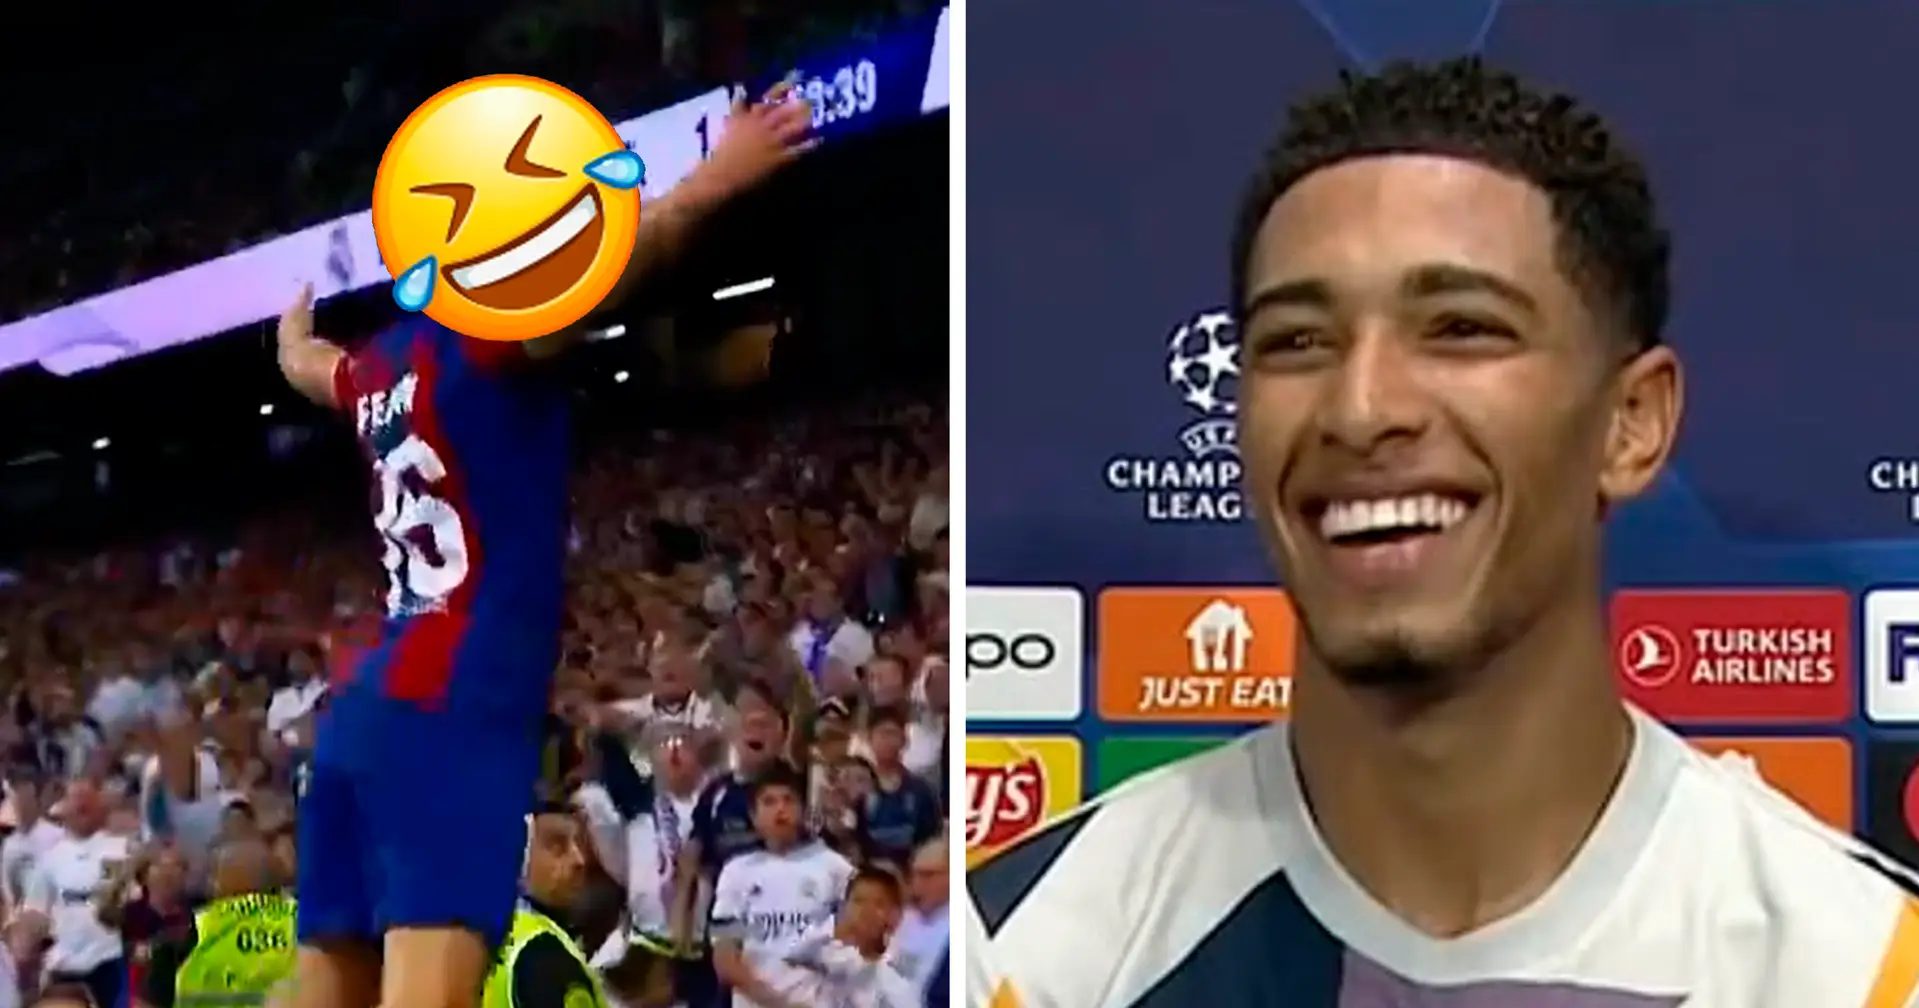 Barca player tries to replicate Bellingham's celebration - Jude later shows him how it's done 